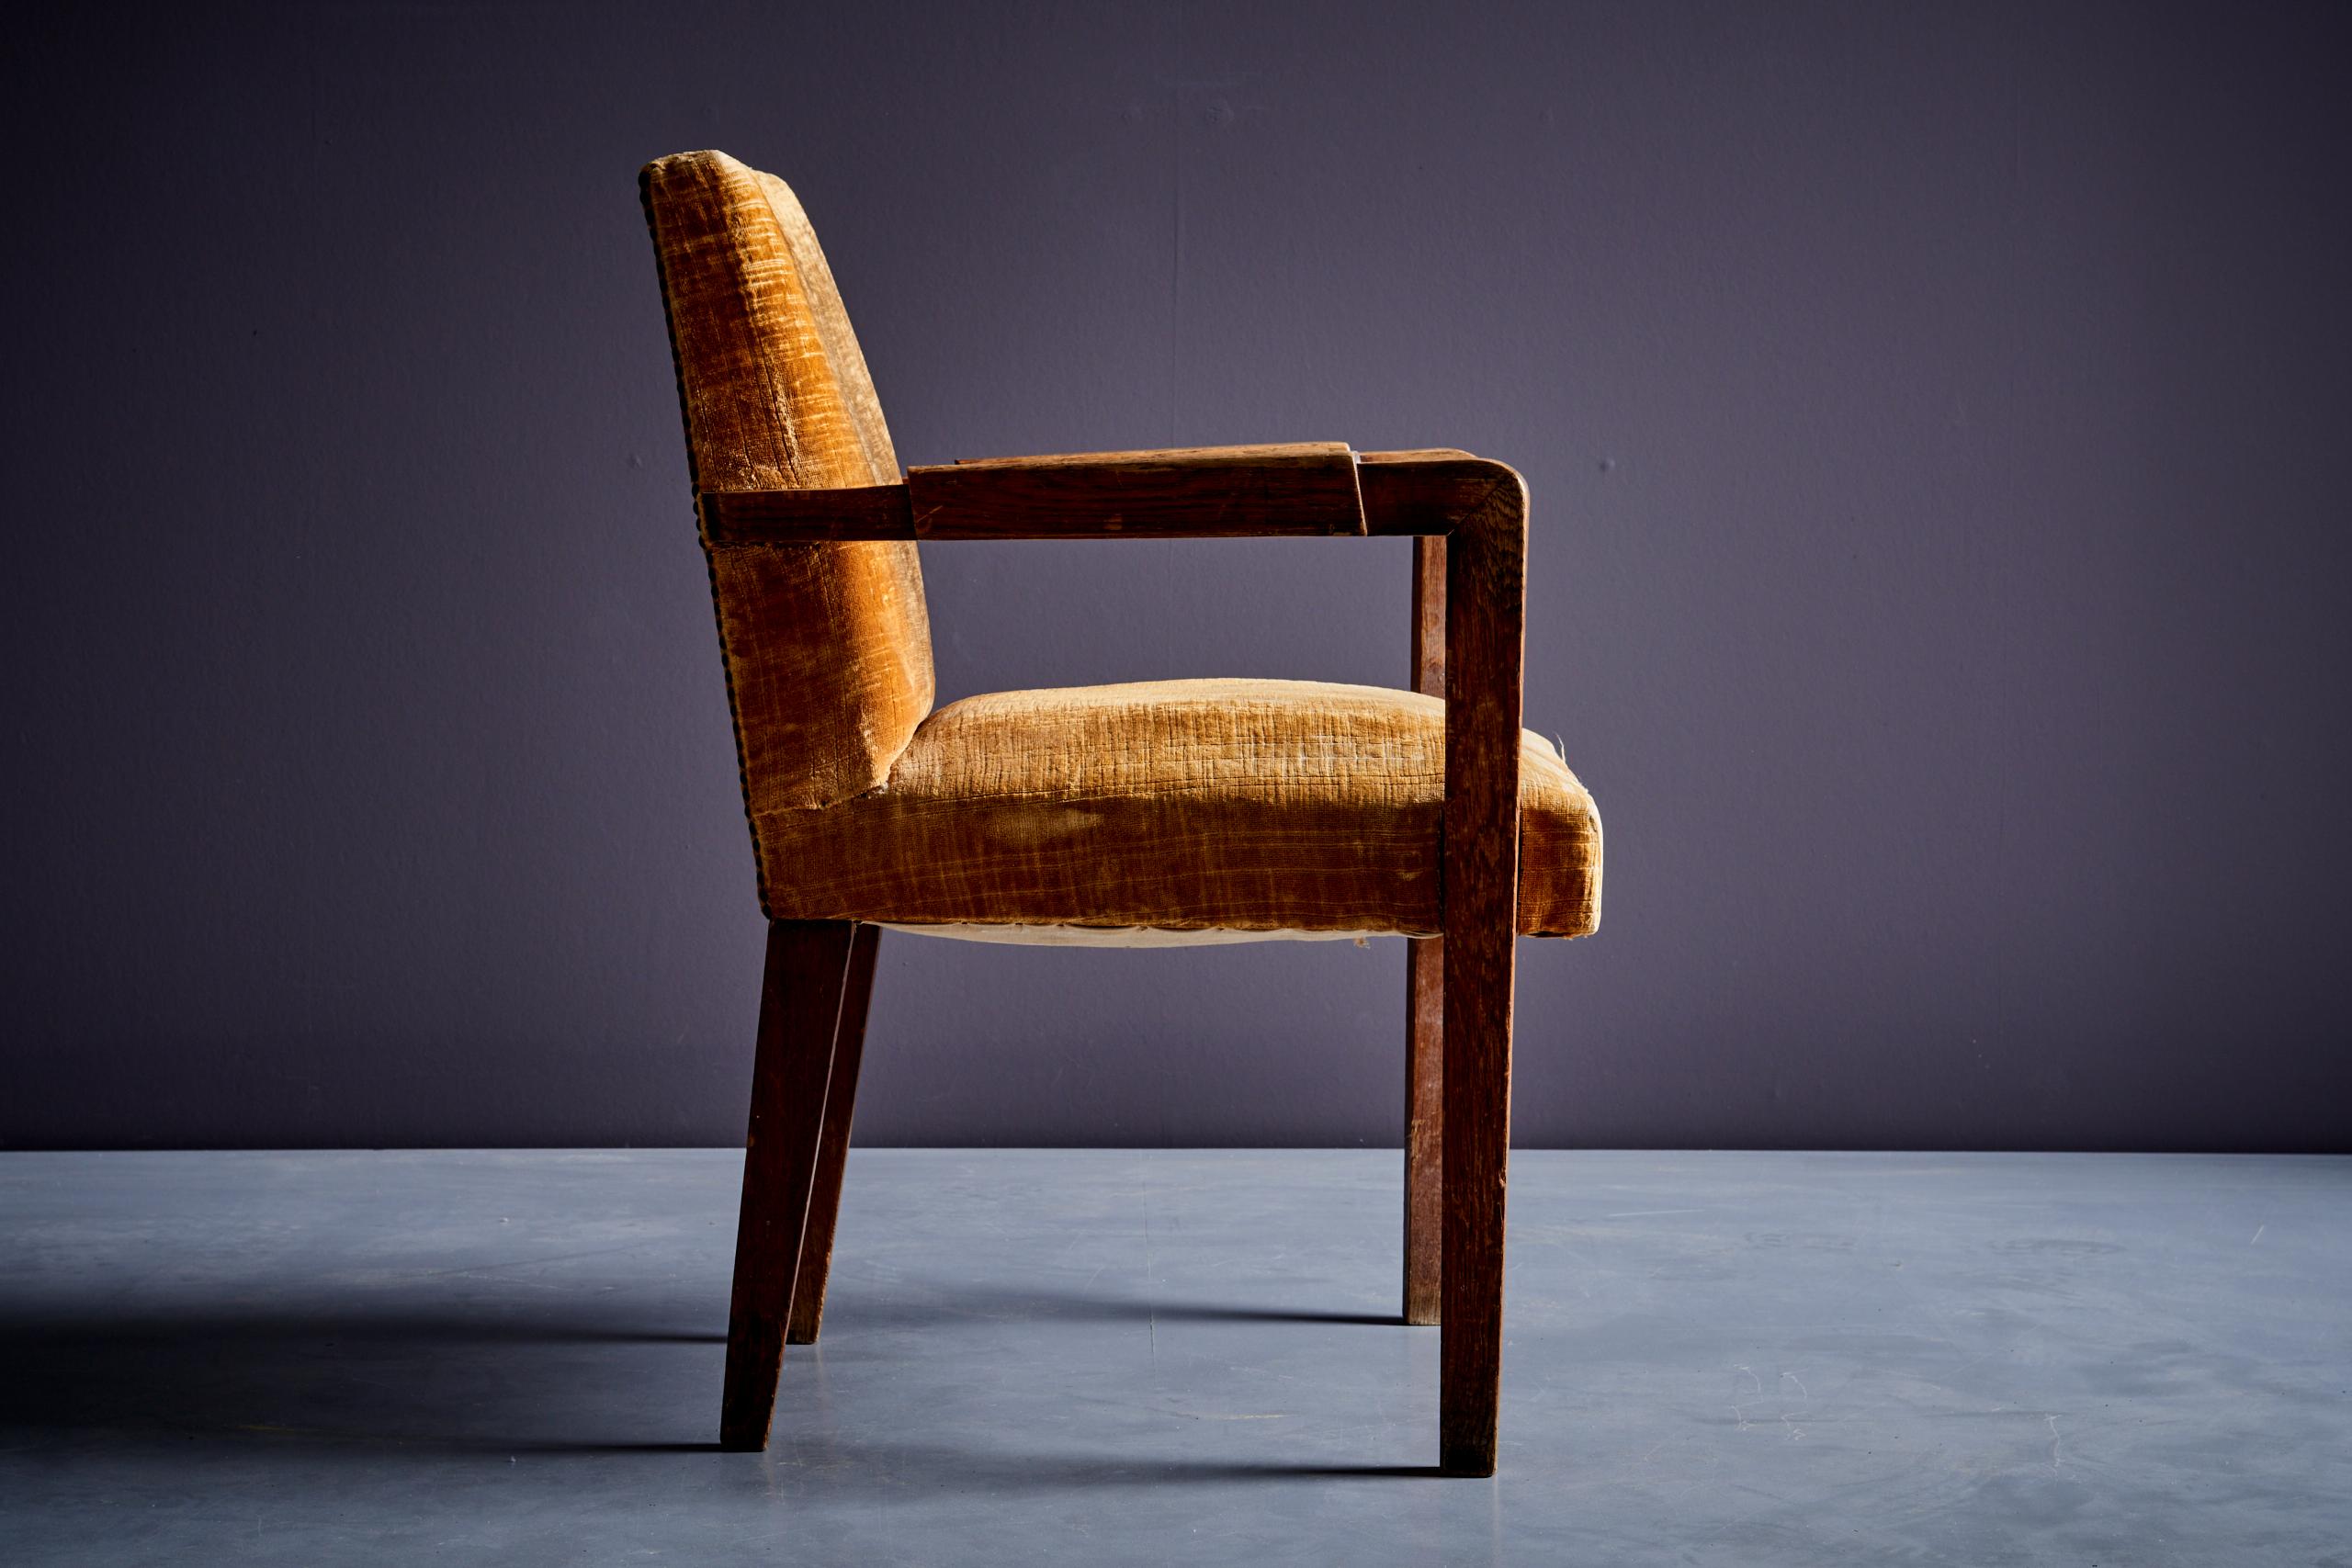 Mid-20th Century Art Deco Armchair in Oak and mustard colored Upholstery, France - 1940s